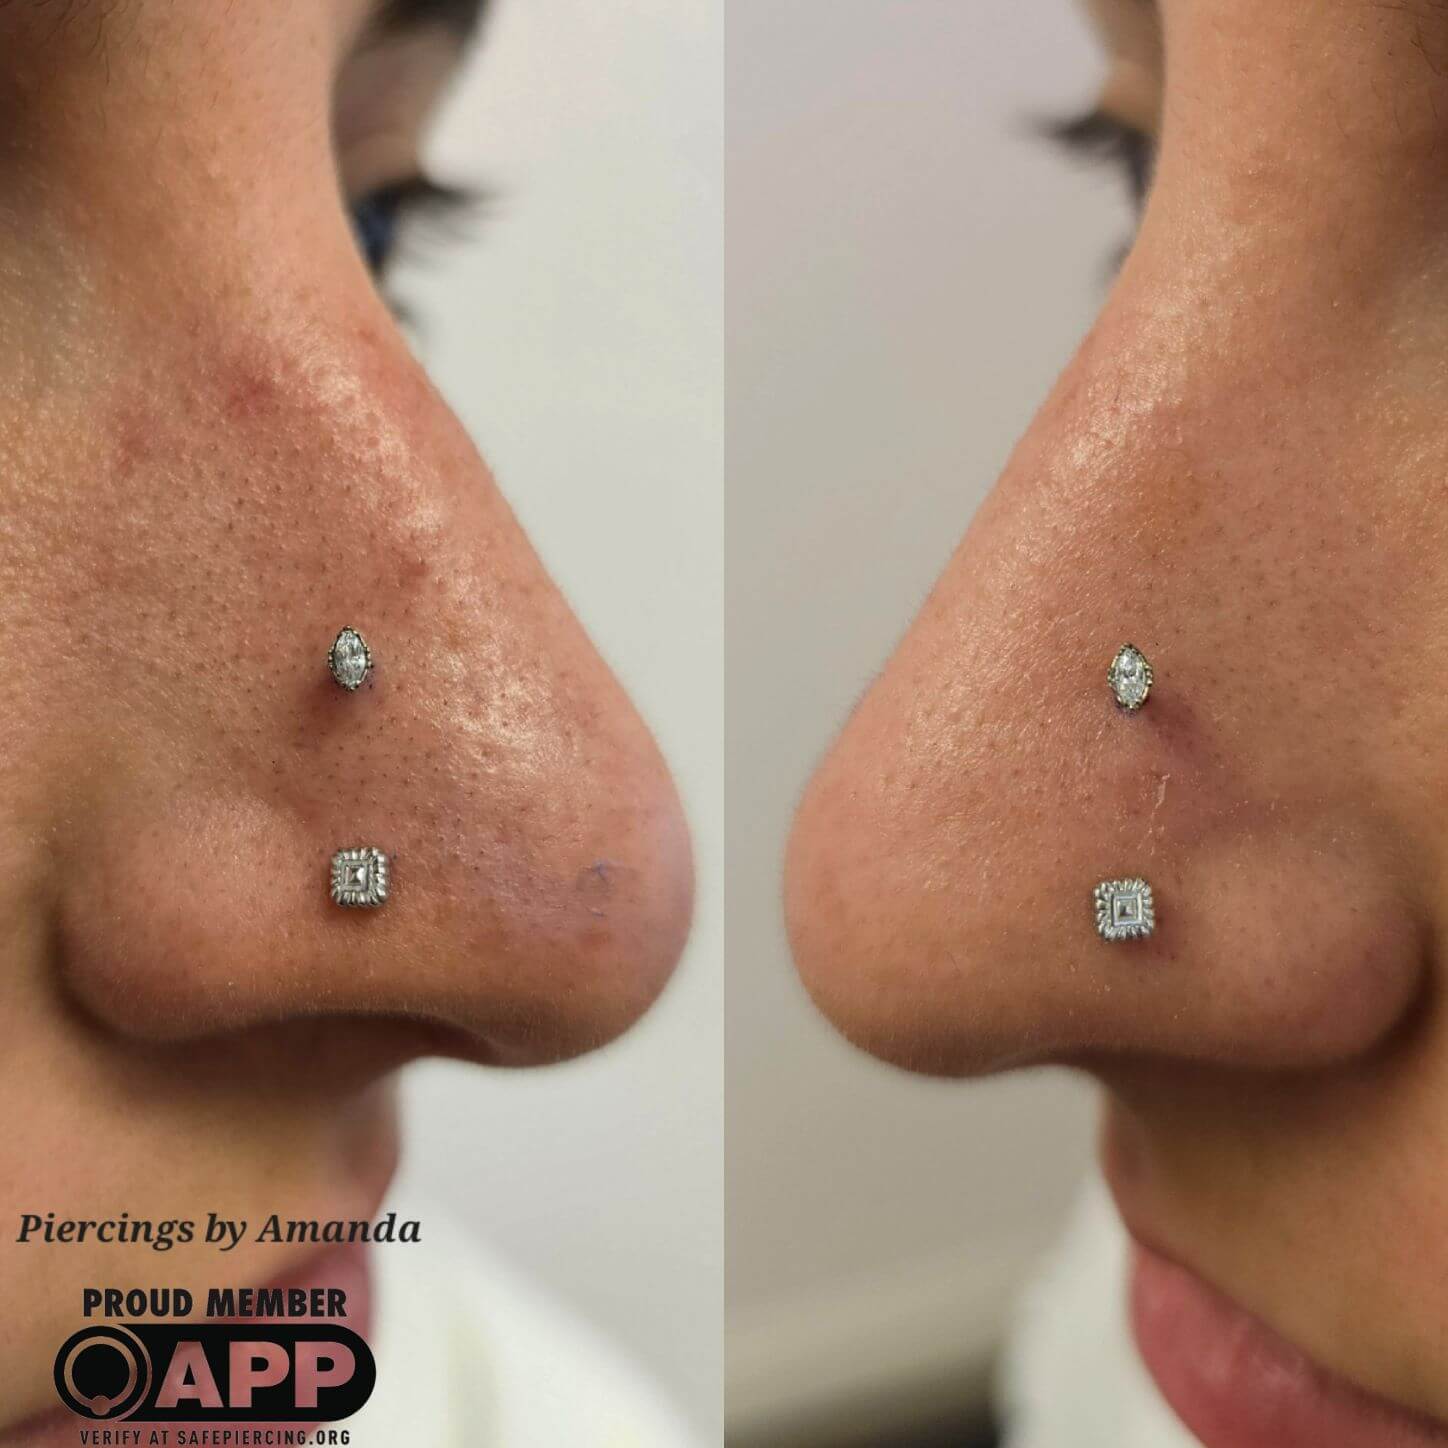 Fresh high nostril piercings with 18k white gold above a set of healed paired nostril piercings with 14k white gold 